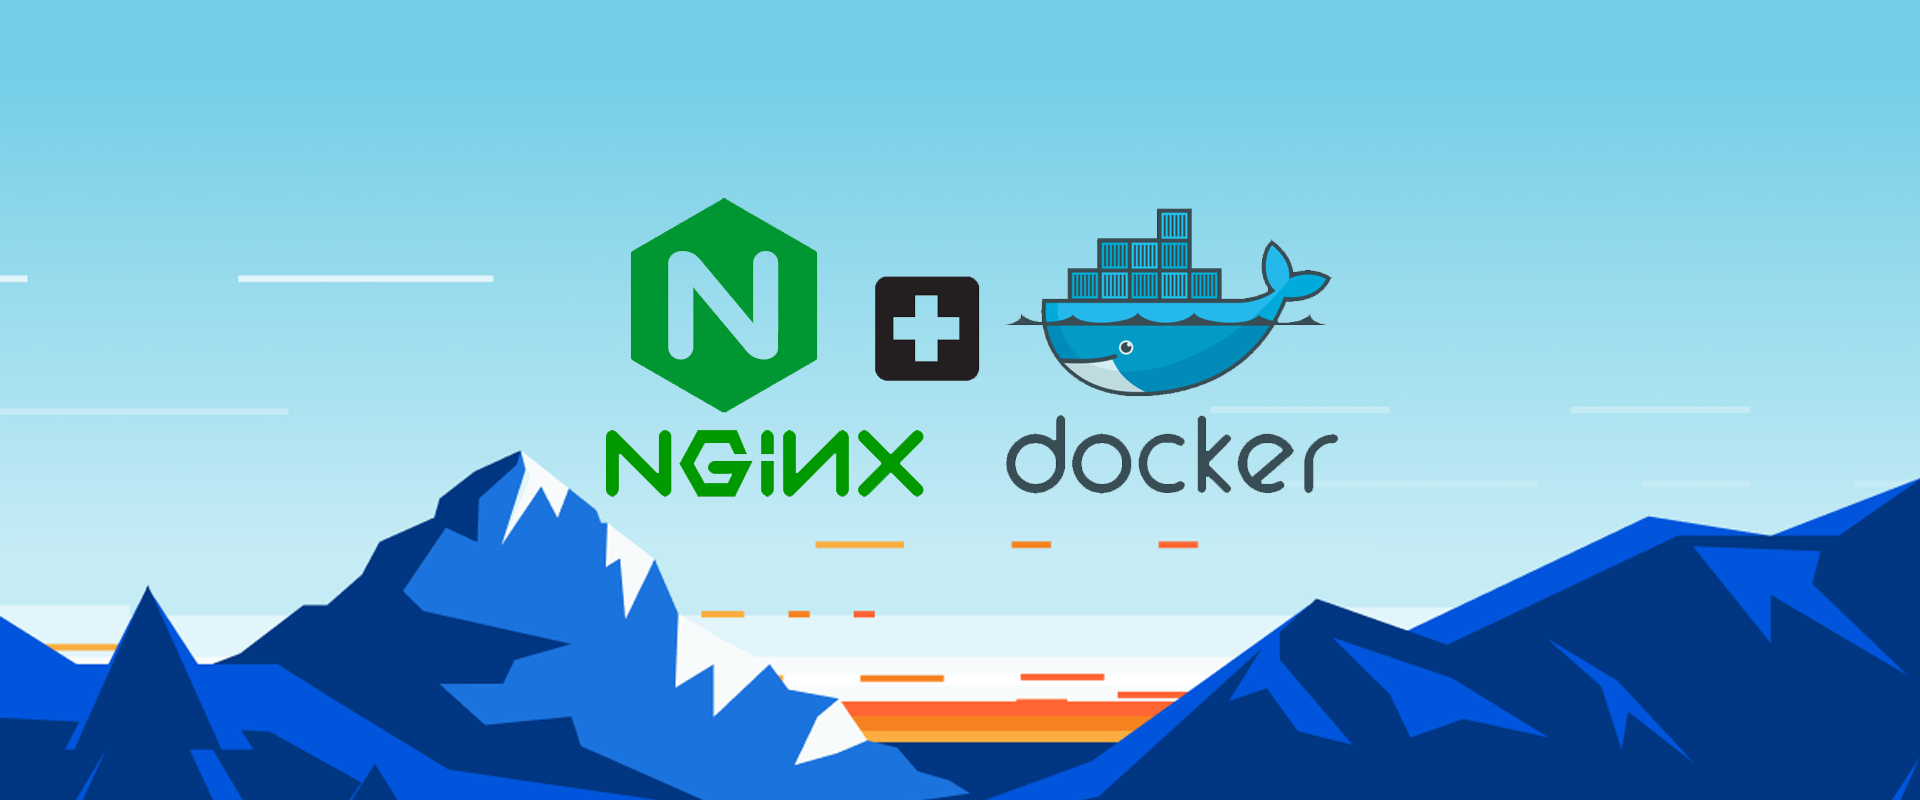 Blog - Setting Up Nginx Container Using Docker: A Step-by-Step Guide To Deployment